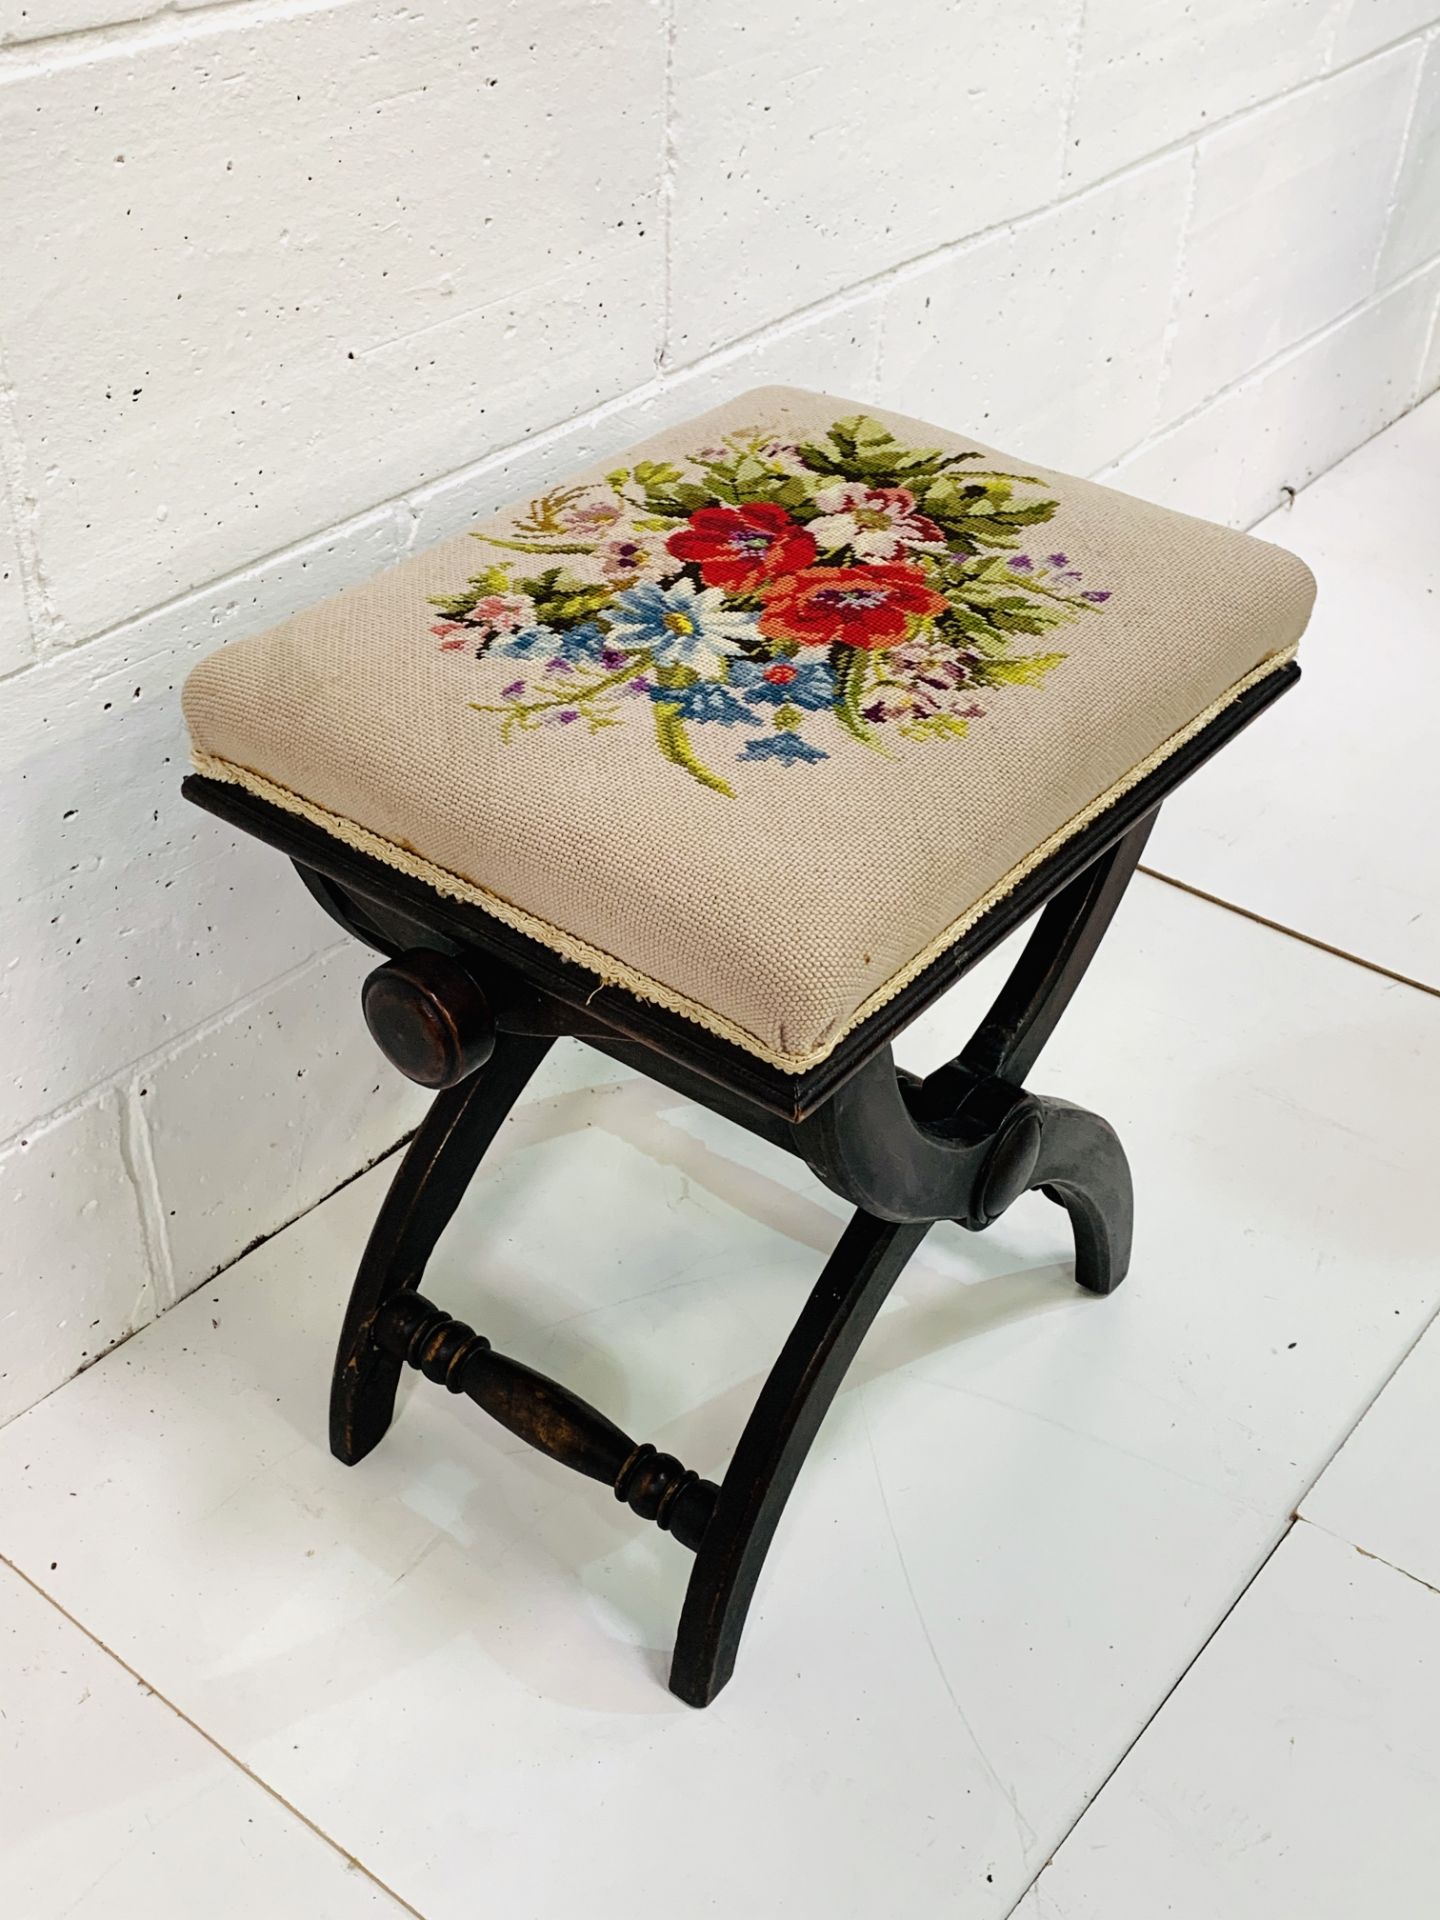 X frame adjustable height stool with tapestry upholstered seat. - Image 3 of 4